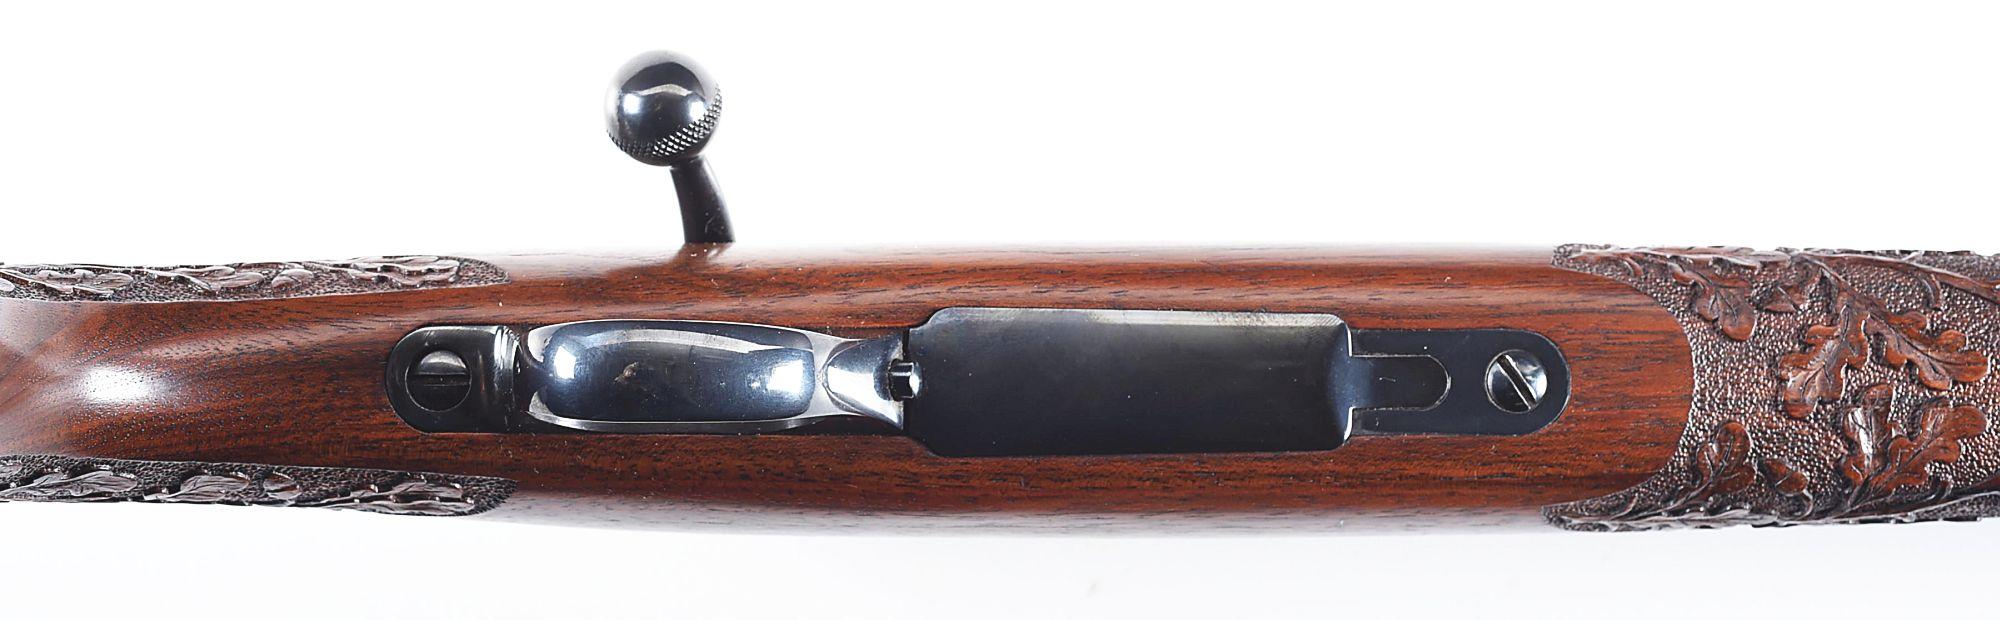 (M) SAKO L461 BOLT ACTION RIFLE CHAMBERED IN .223 REMINGTON,